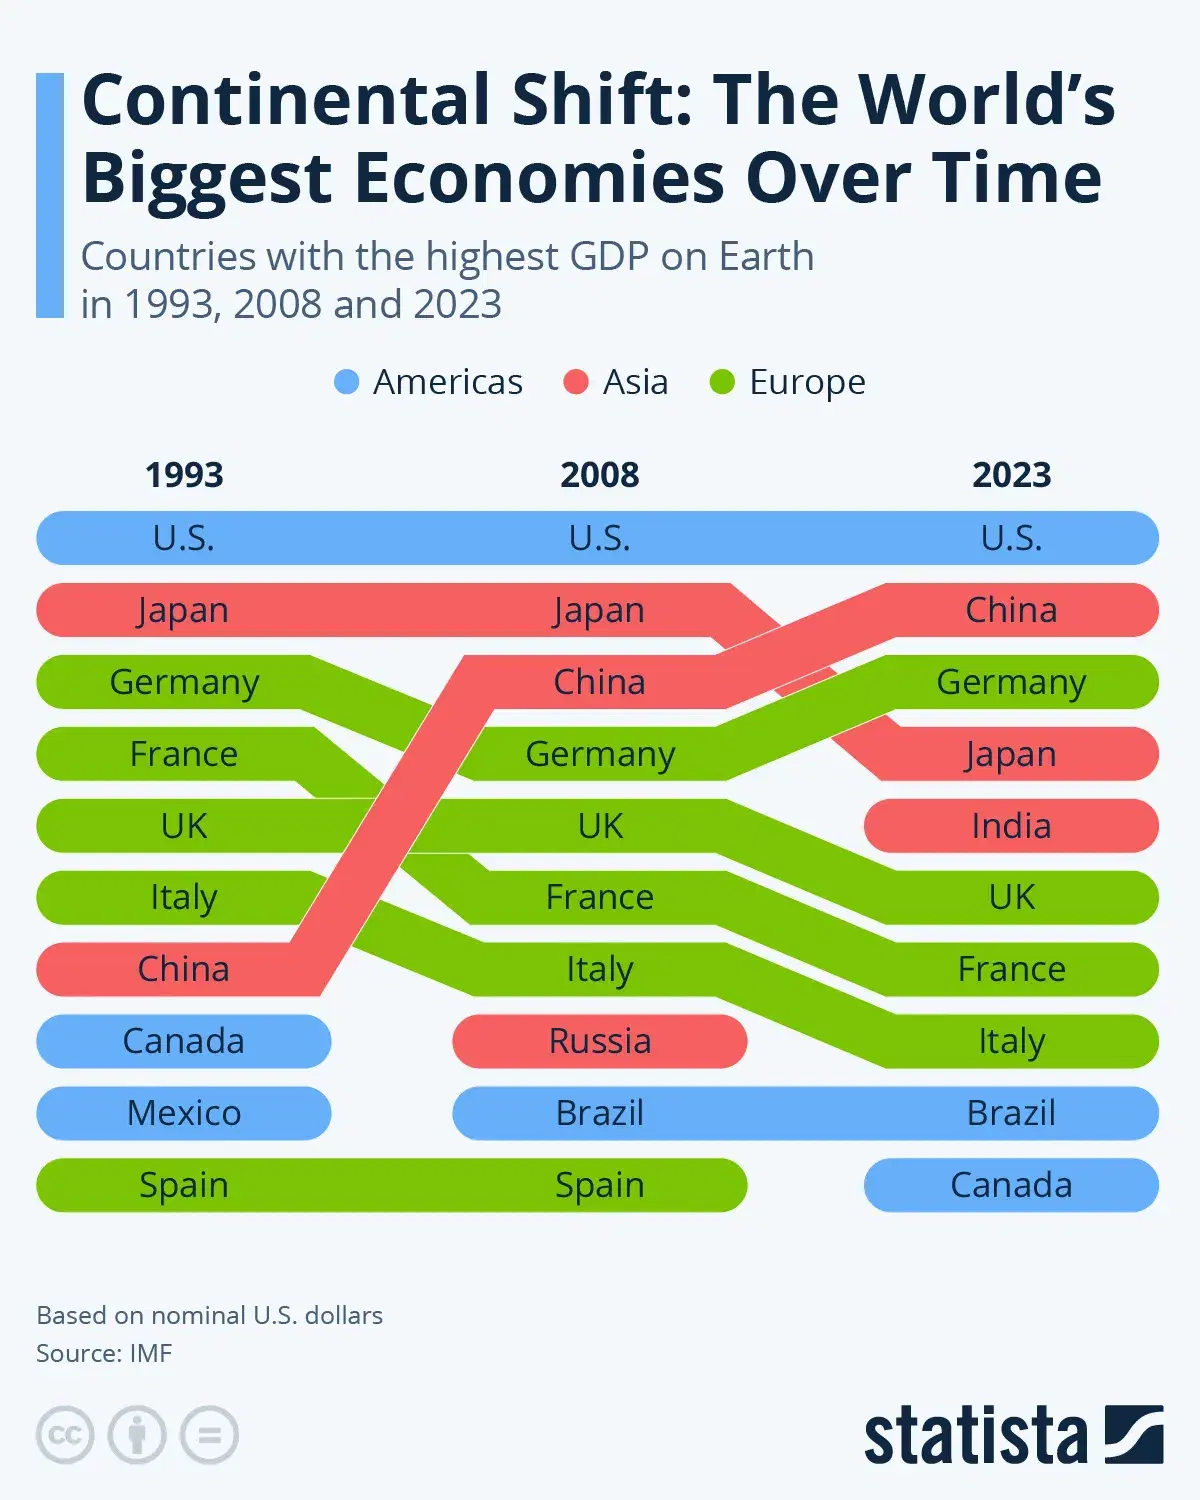 Continental Shift: The Biggest Economies Over Time